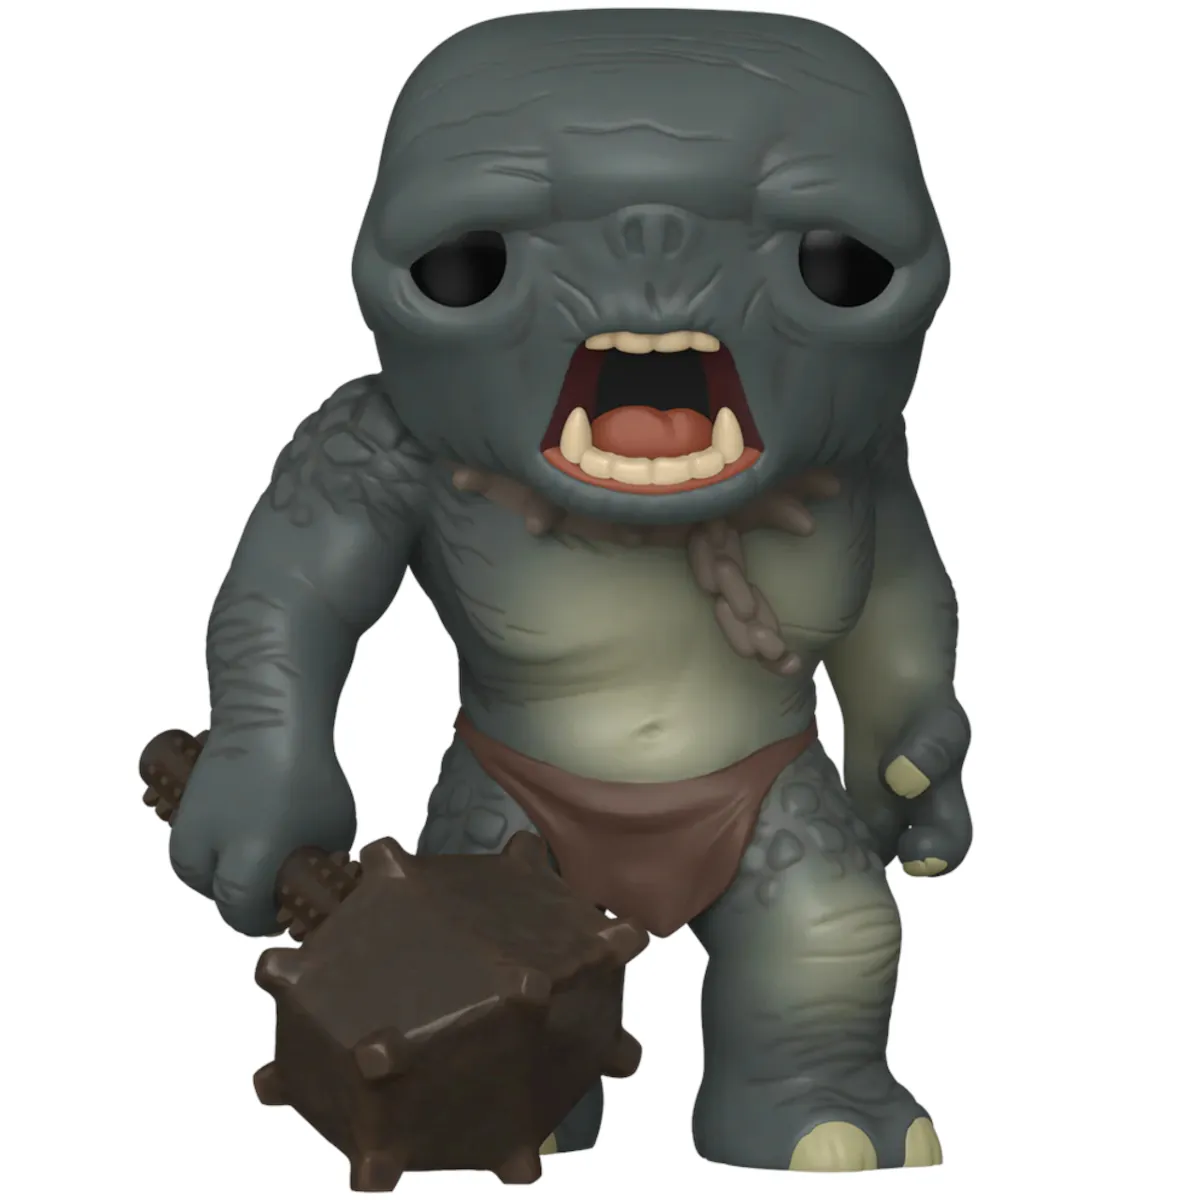 80830 Funko Pop! Movies - The Lord of the Rings - Cave Troll Super Sized Collectable Vinyl Figure